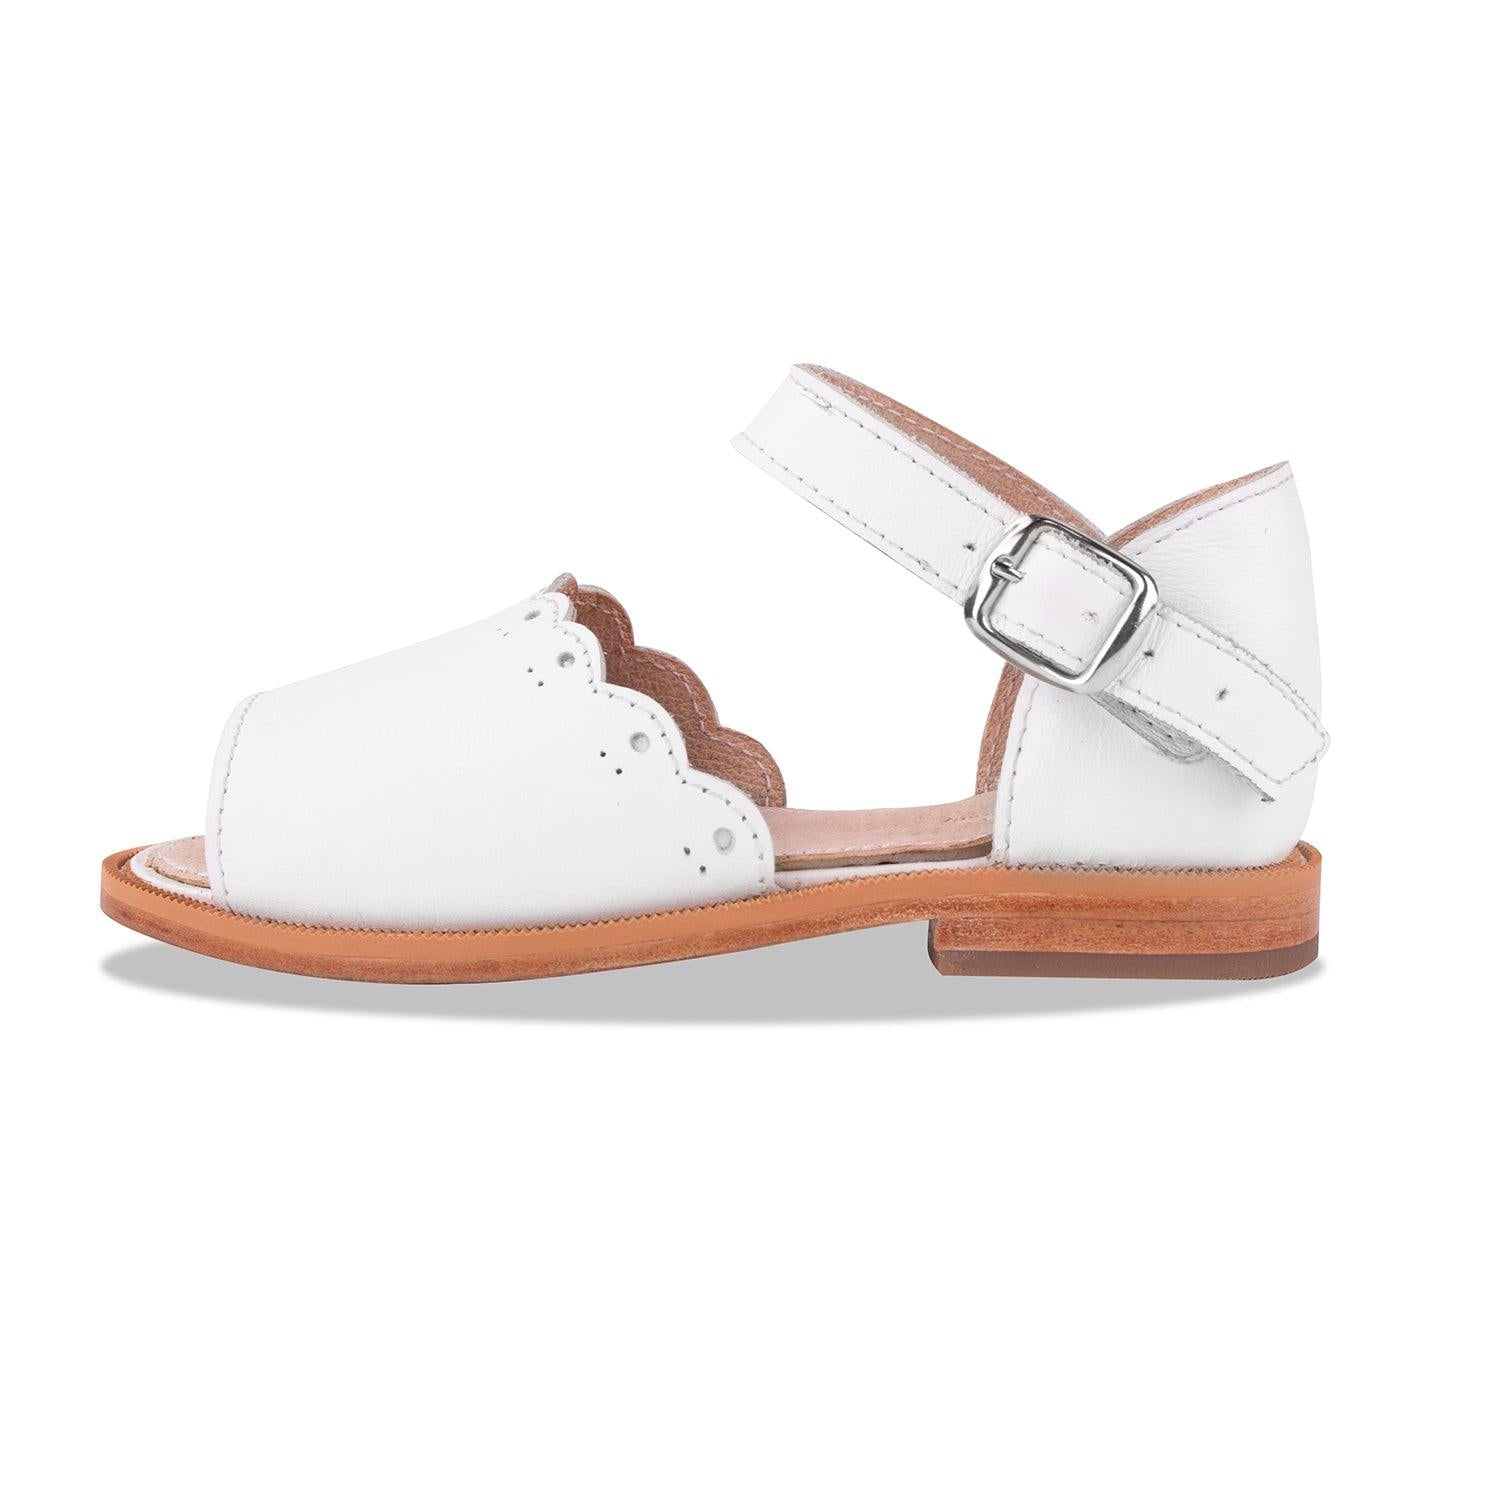 Gallucci Kids bucked leather sandals - White